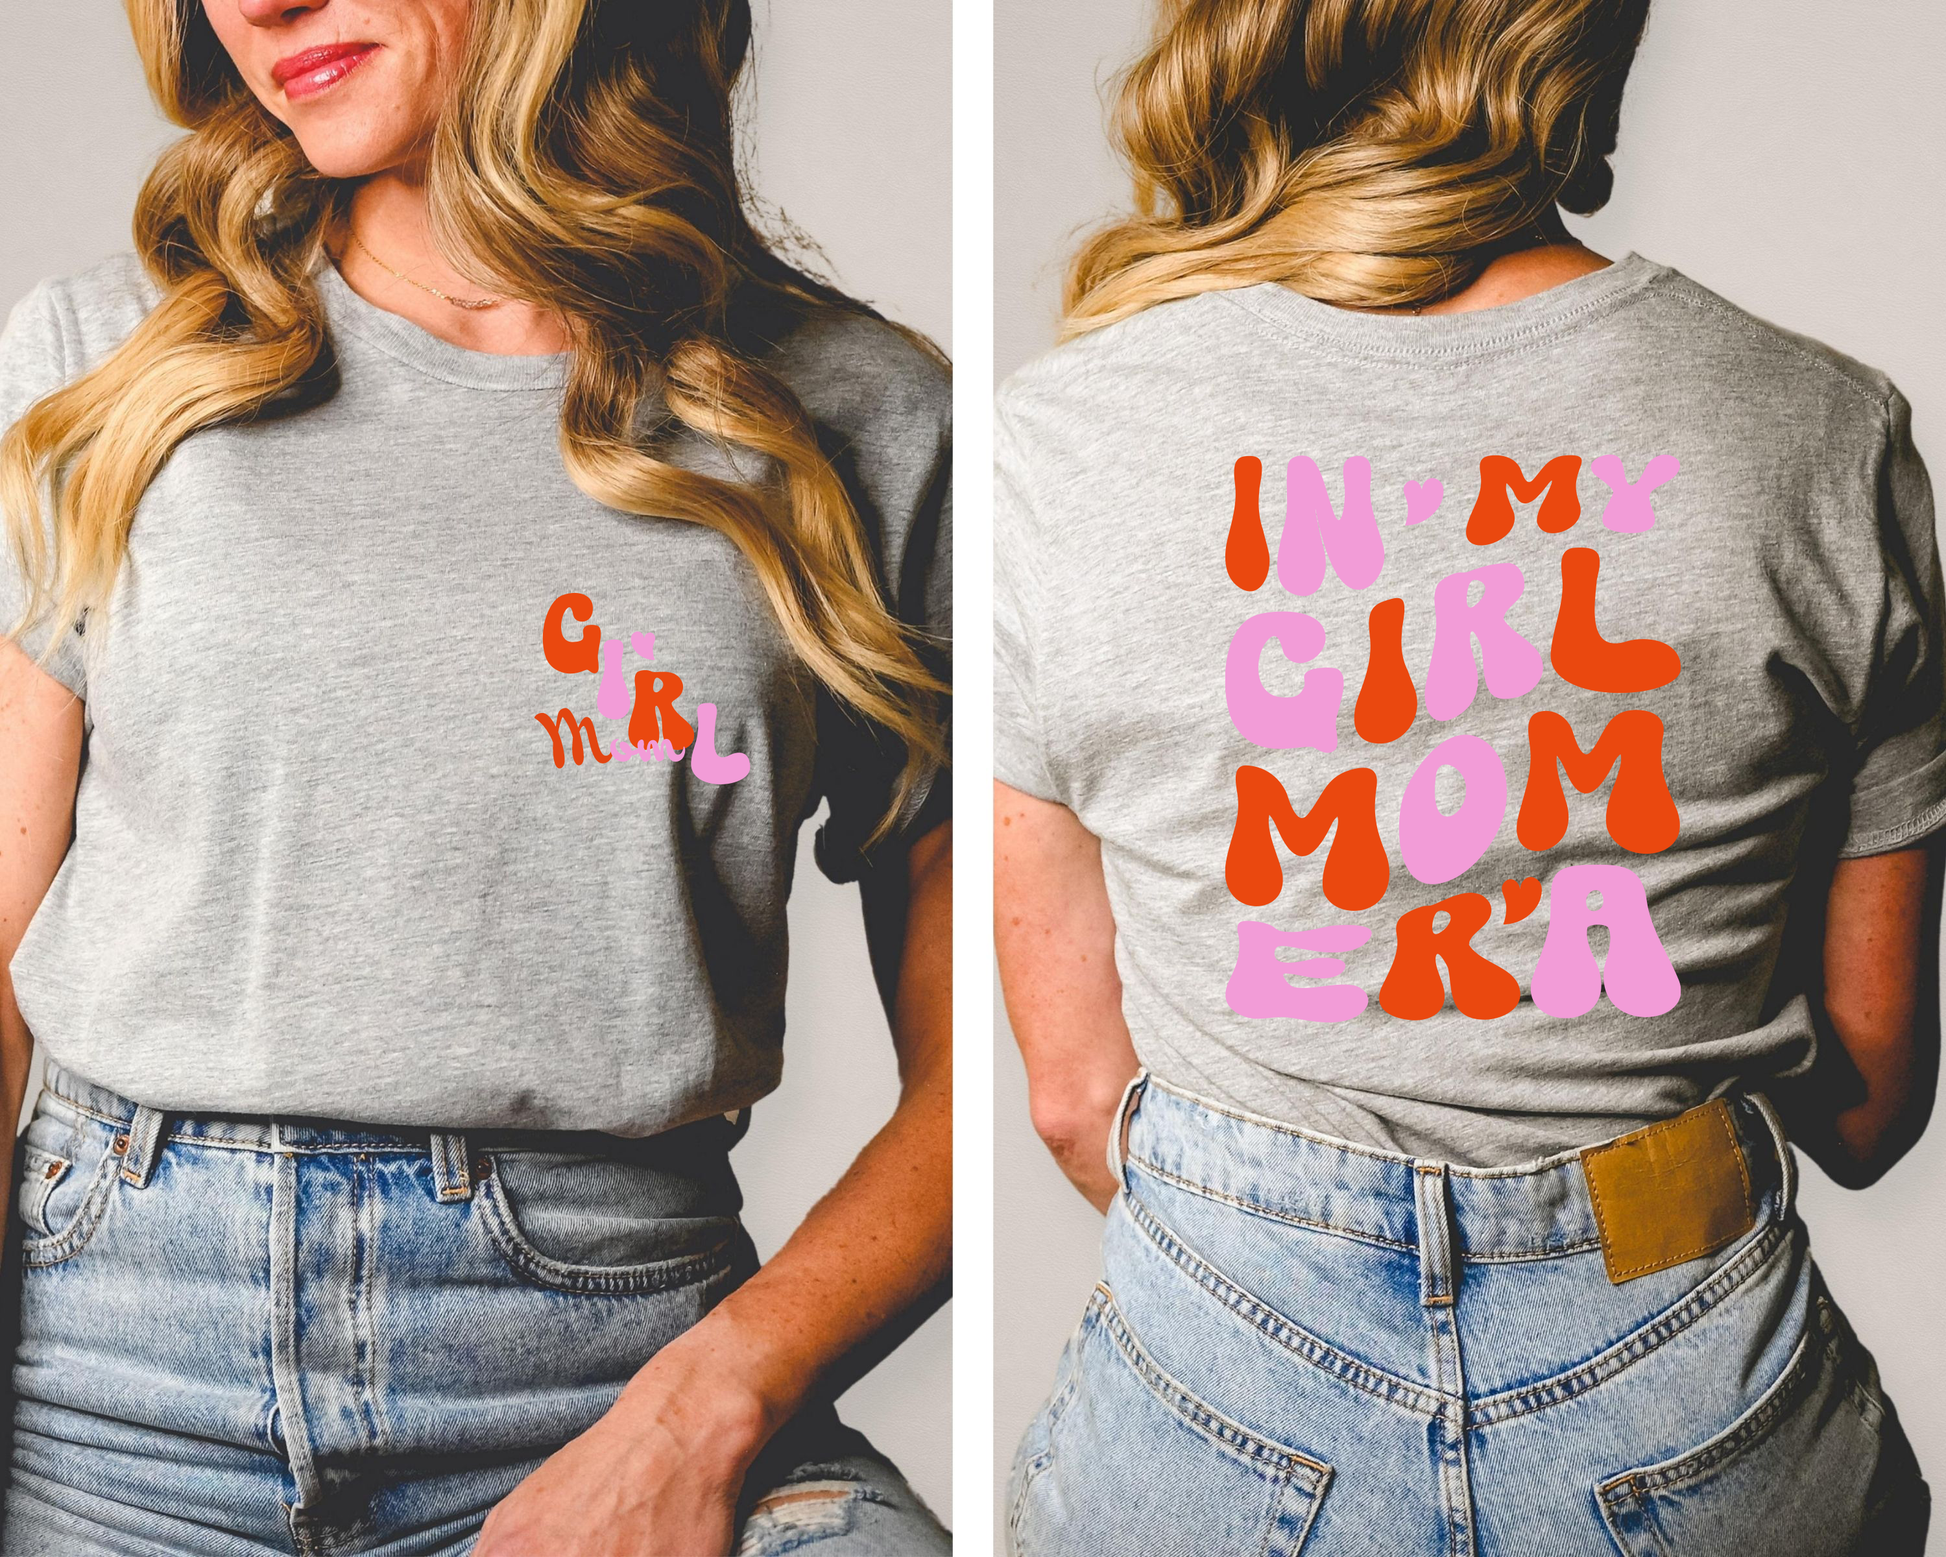 Shirt featuring the phrase 'In My Girl Mom Era' for moms who connect with the movie's emotions." 